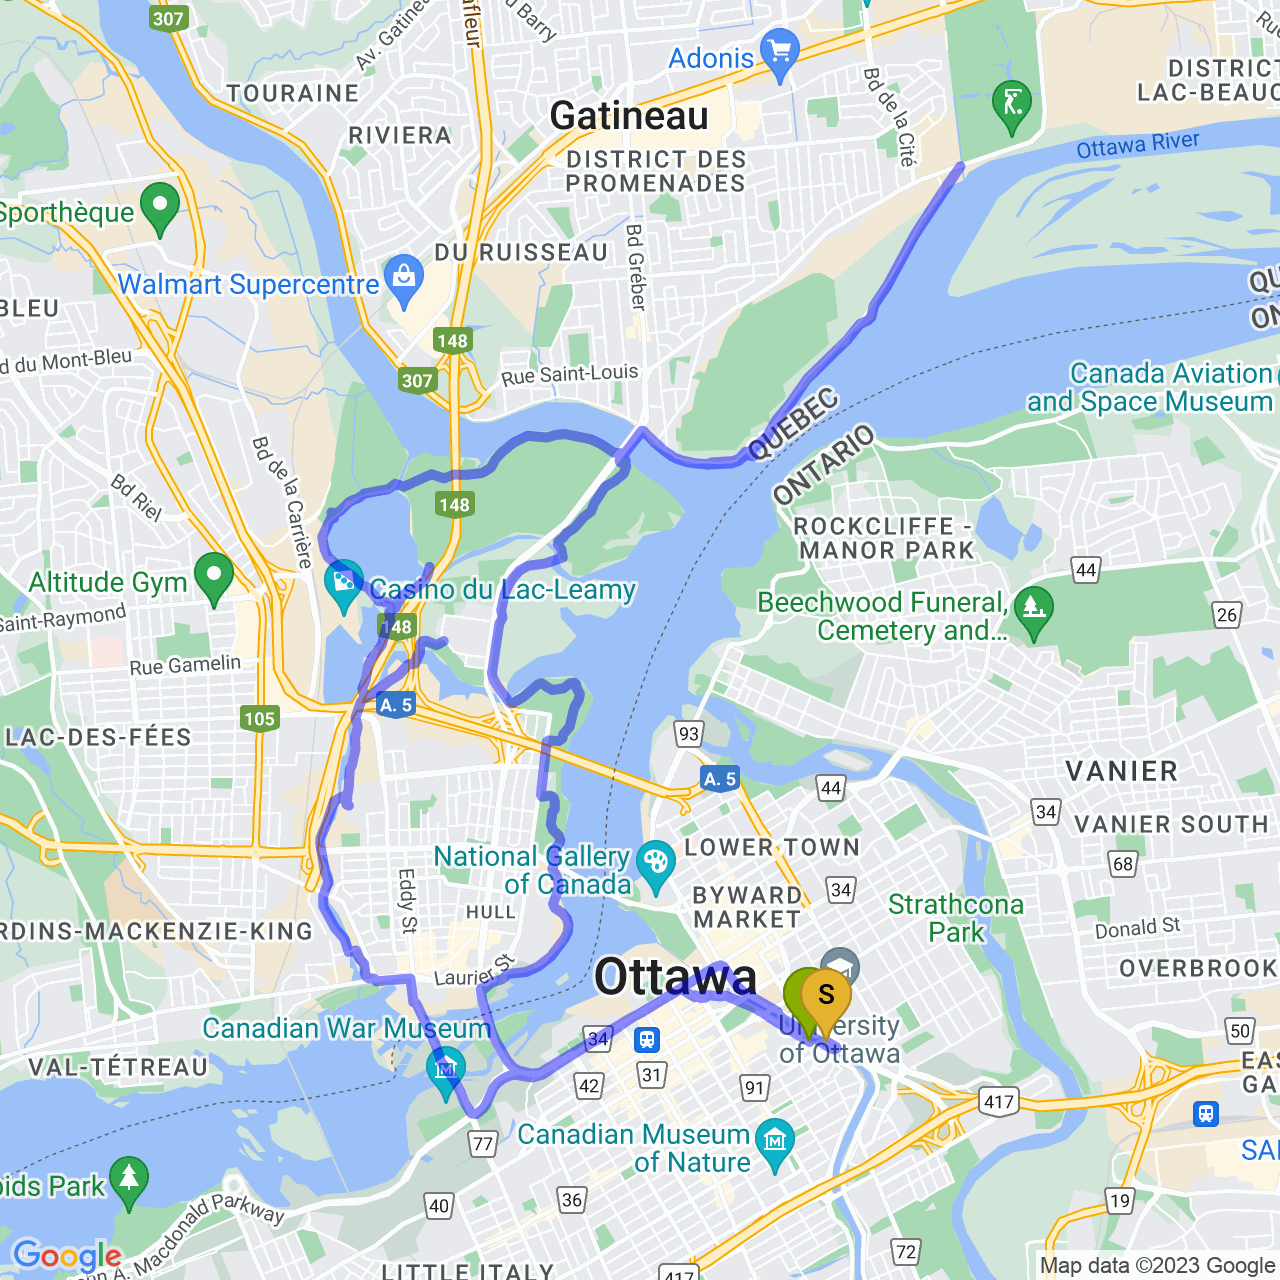 map of Riding around Lac-Leamy and Gatineau